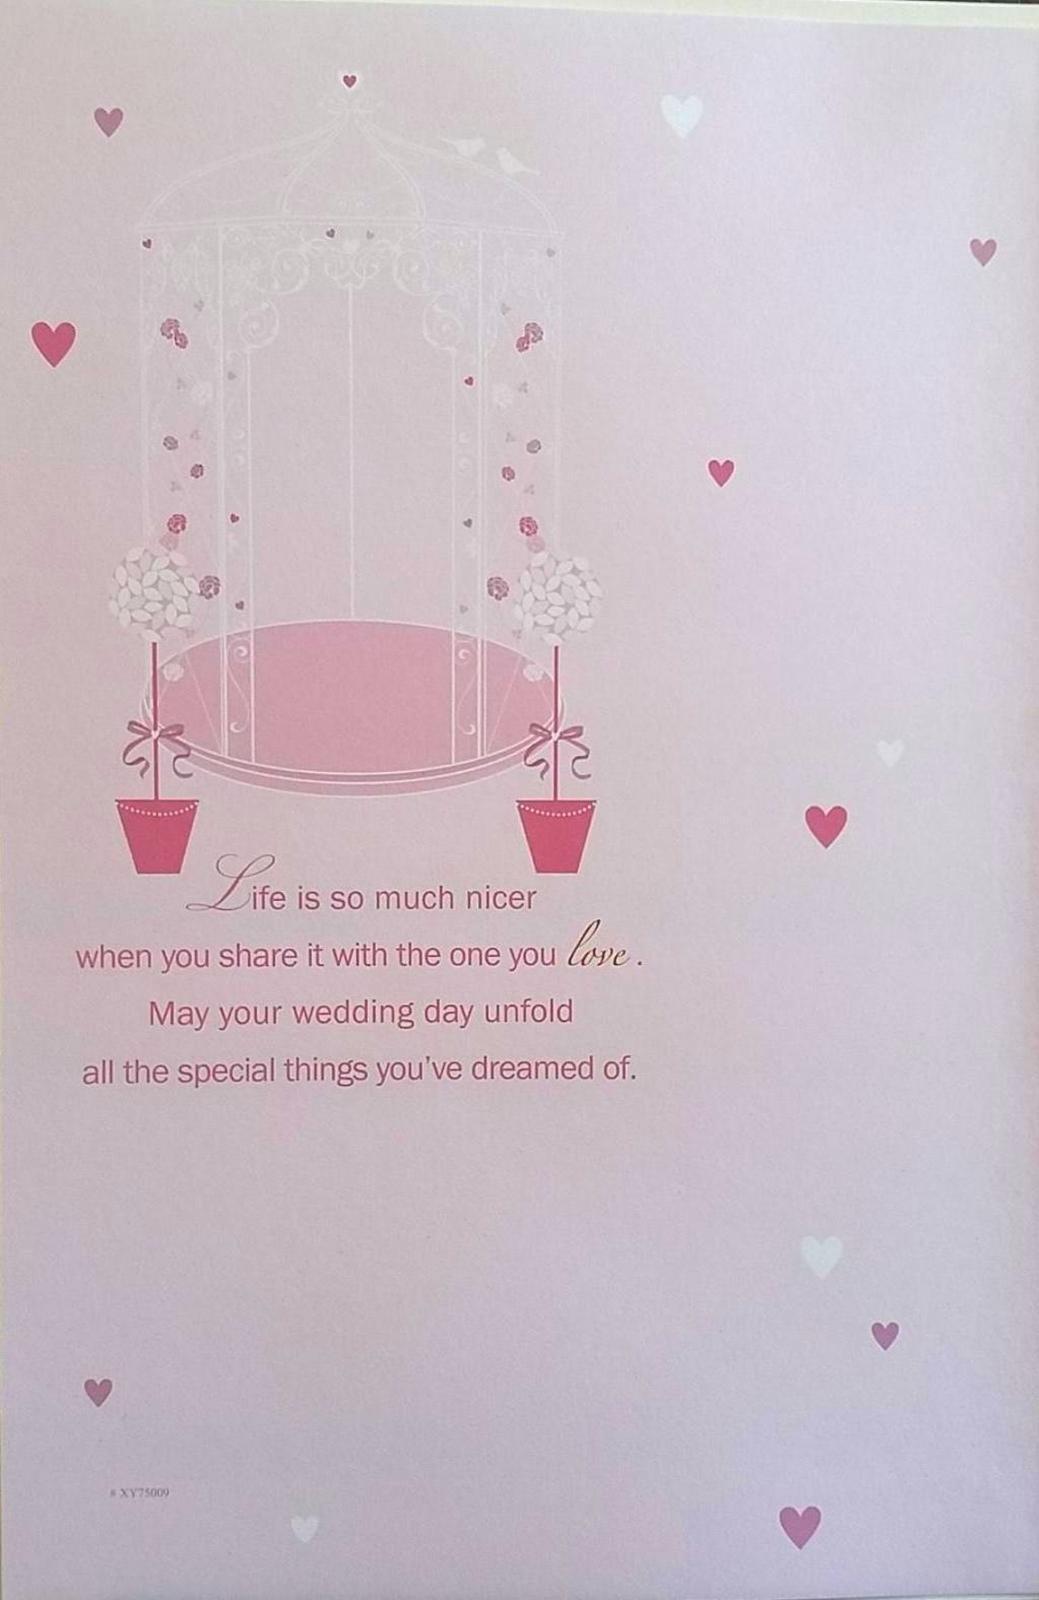 Your Wedding Day Nice Verse with Couple Congratulations Card